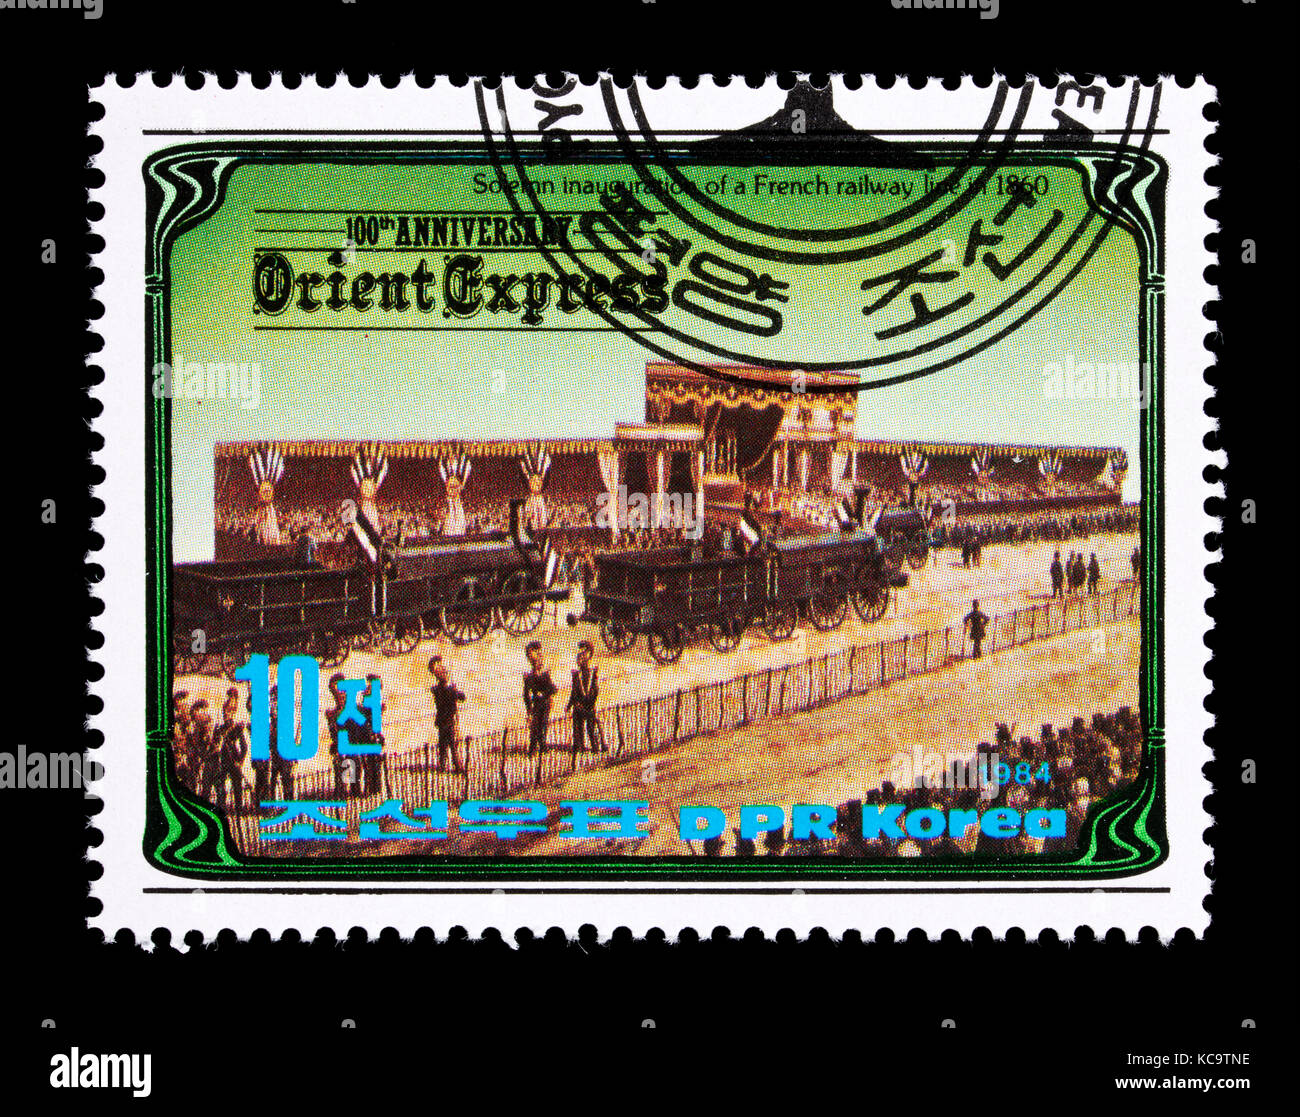 Postage stamp from North Korea, for the centennial of the Orient Express, opening of French railway line in 1860. Stock Photo